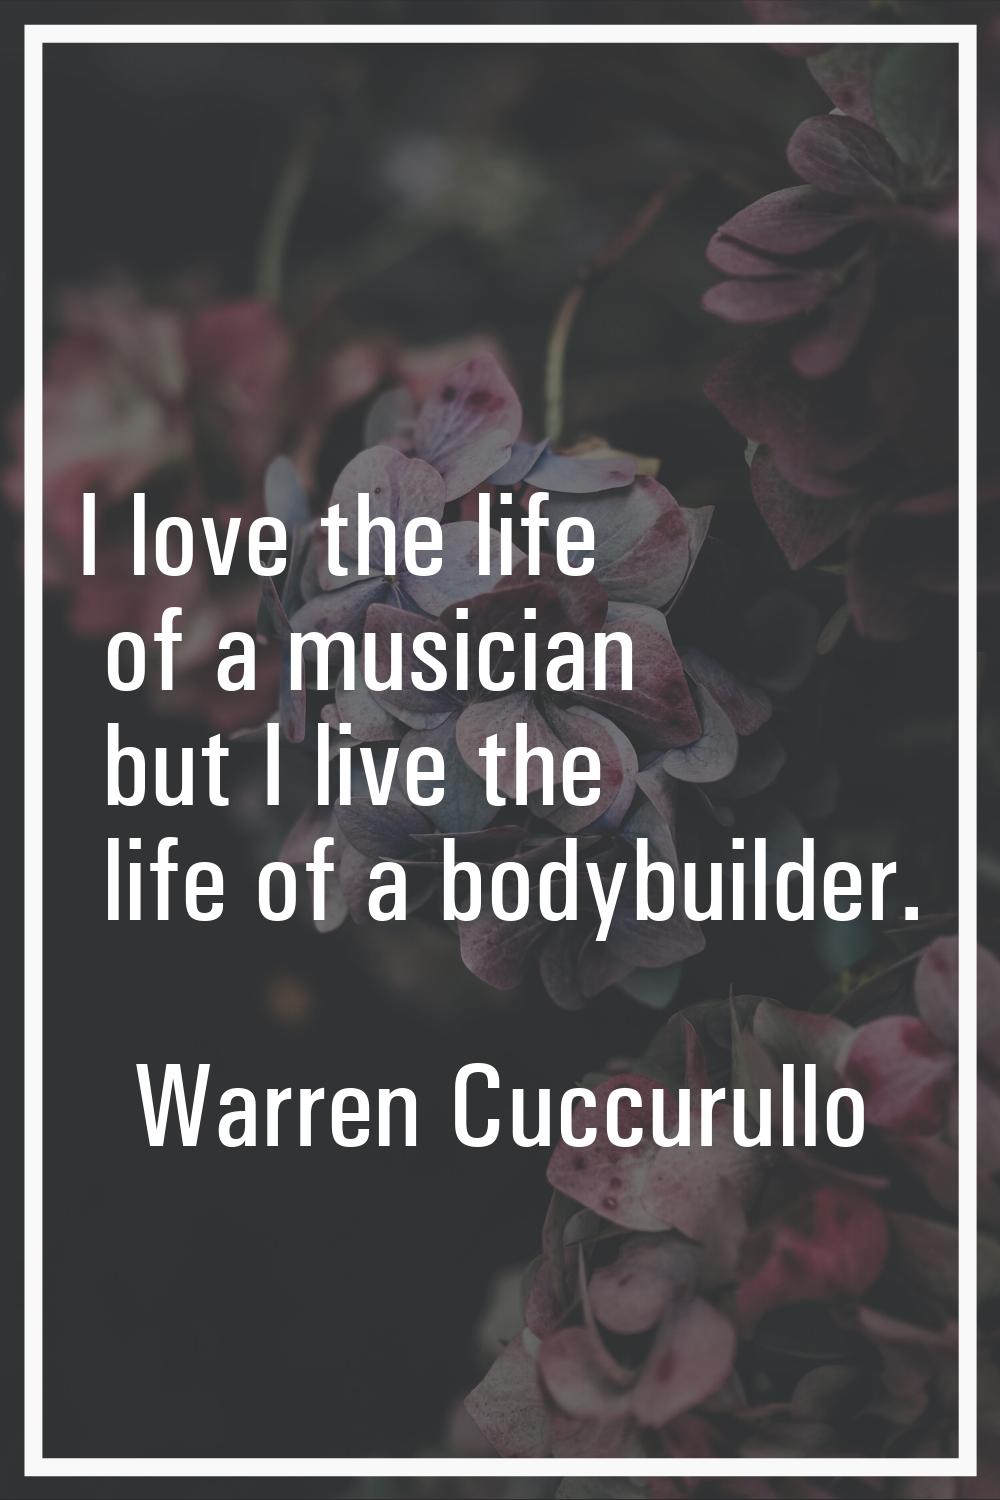 I love the life of a musician but I live the life of a bodybuilder.